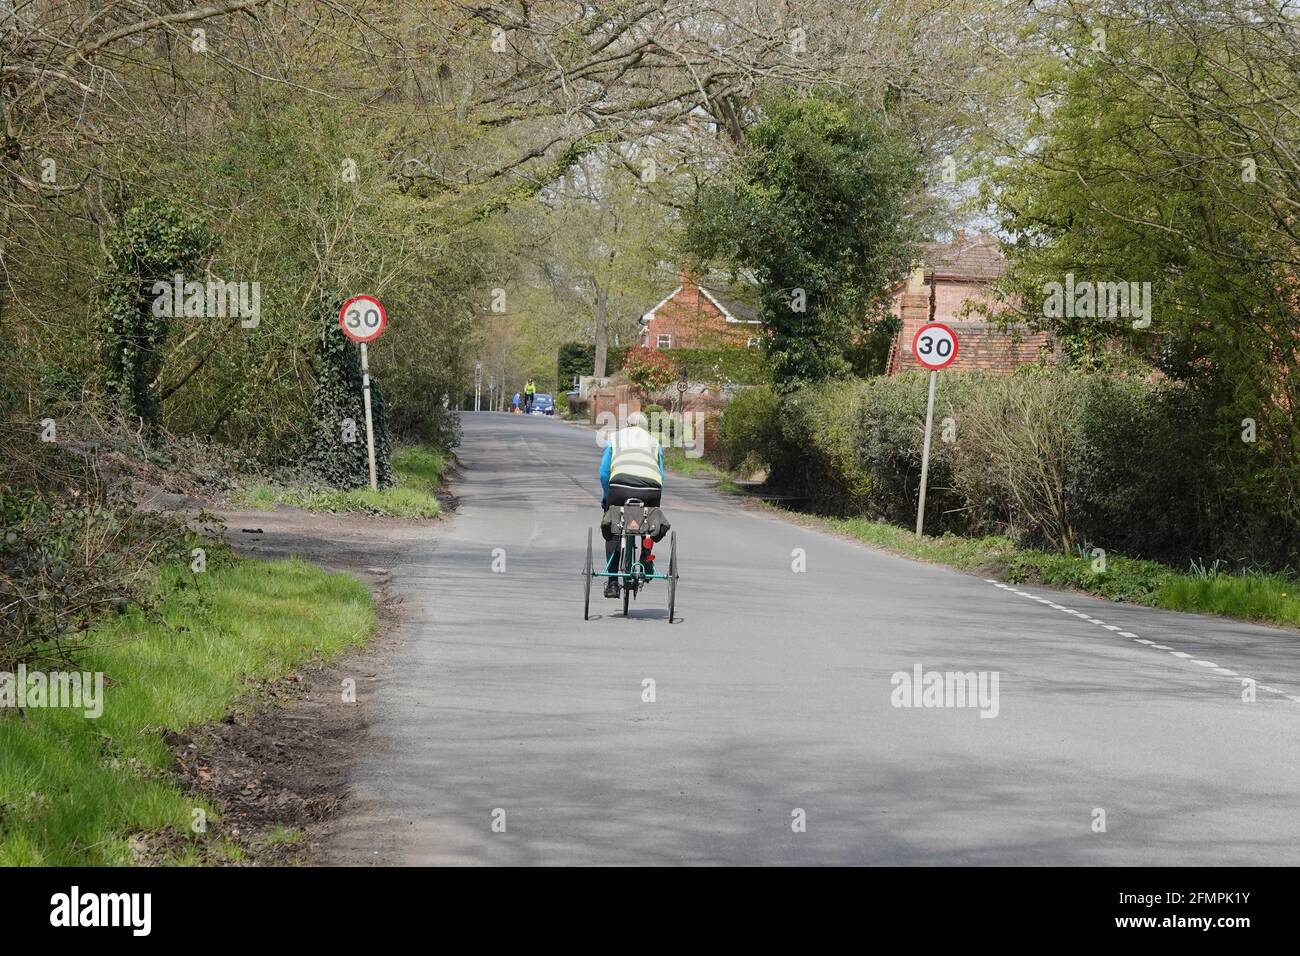 A senior man riding a tricycle along a country road in the UK Stock Photo